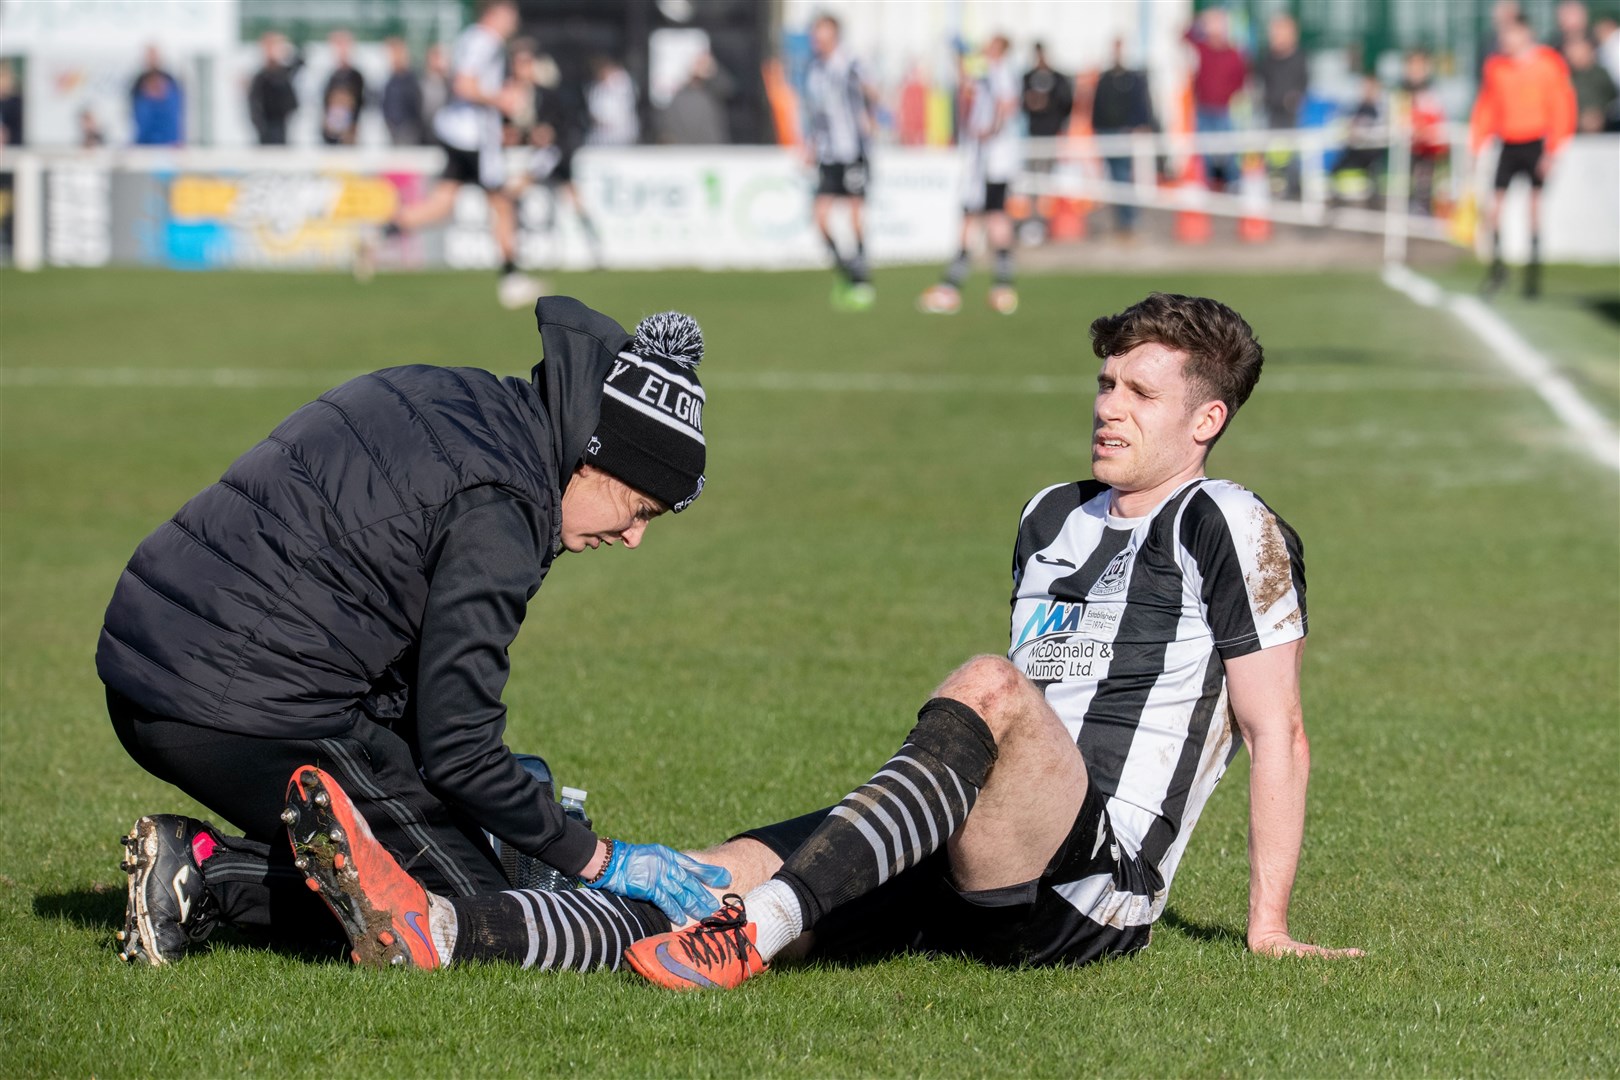 Lyall Booth injured. Elgin City FC (2) vs The Spartans (2) - SPFL League Two 23/24 - Borough Briggs, Elgin 06/04/24.Picture: Daniel Forsyth.